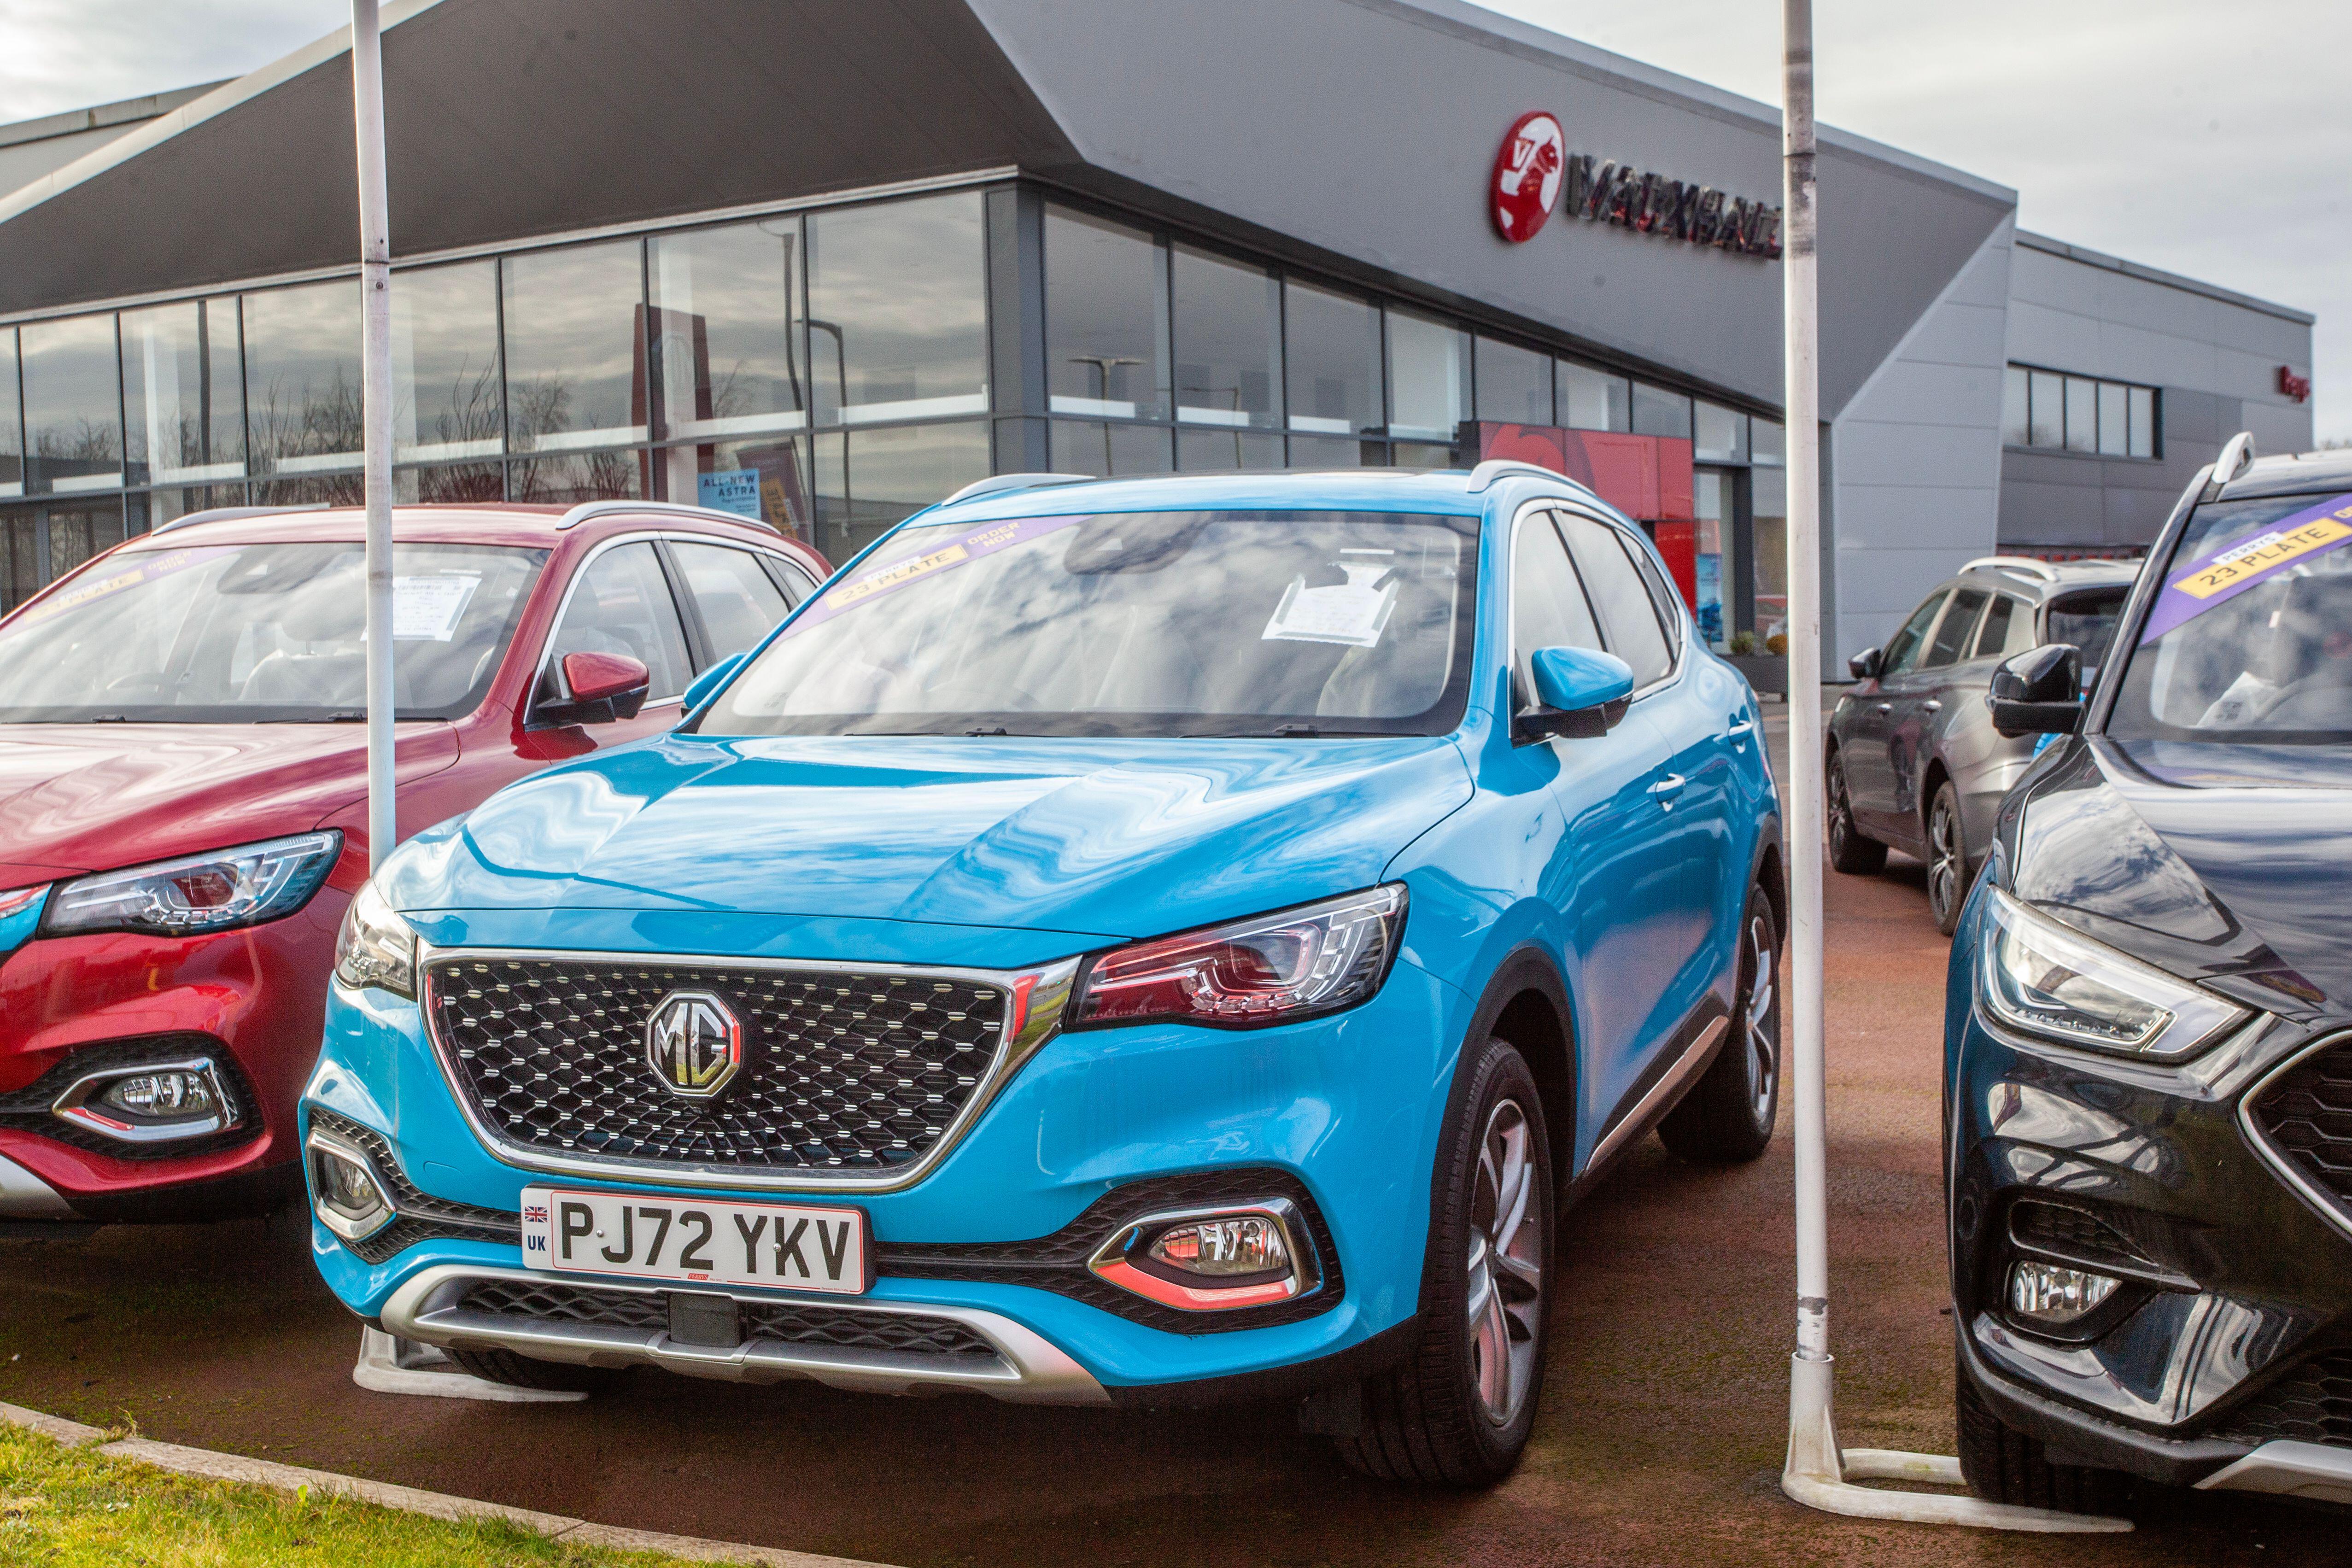 The experts praised the MG ZS EV for its value